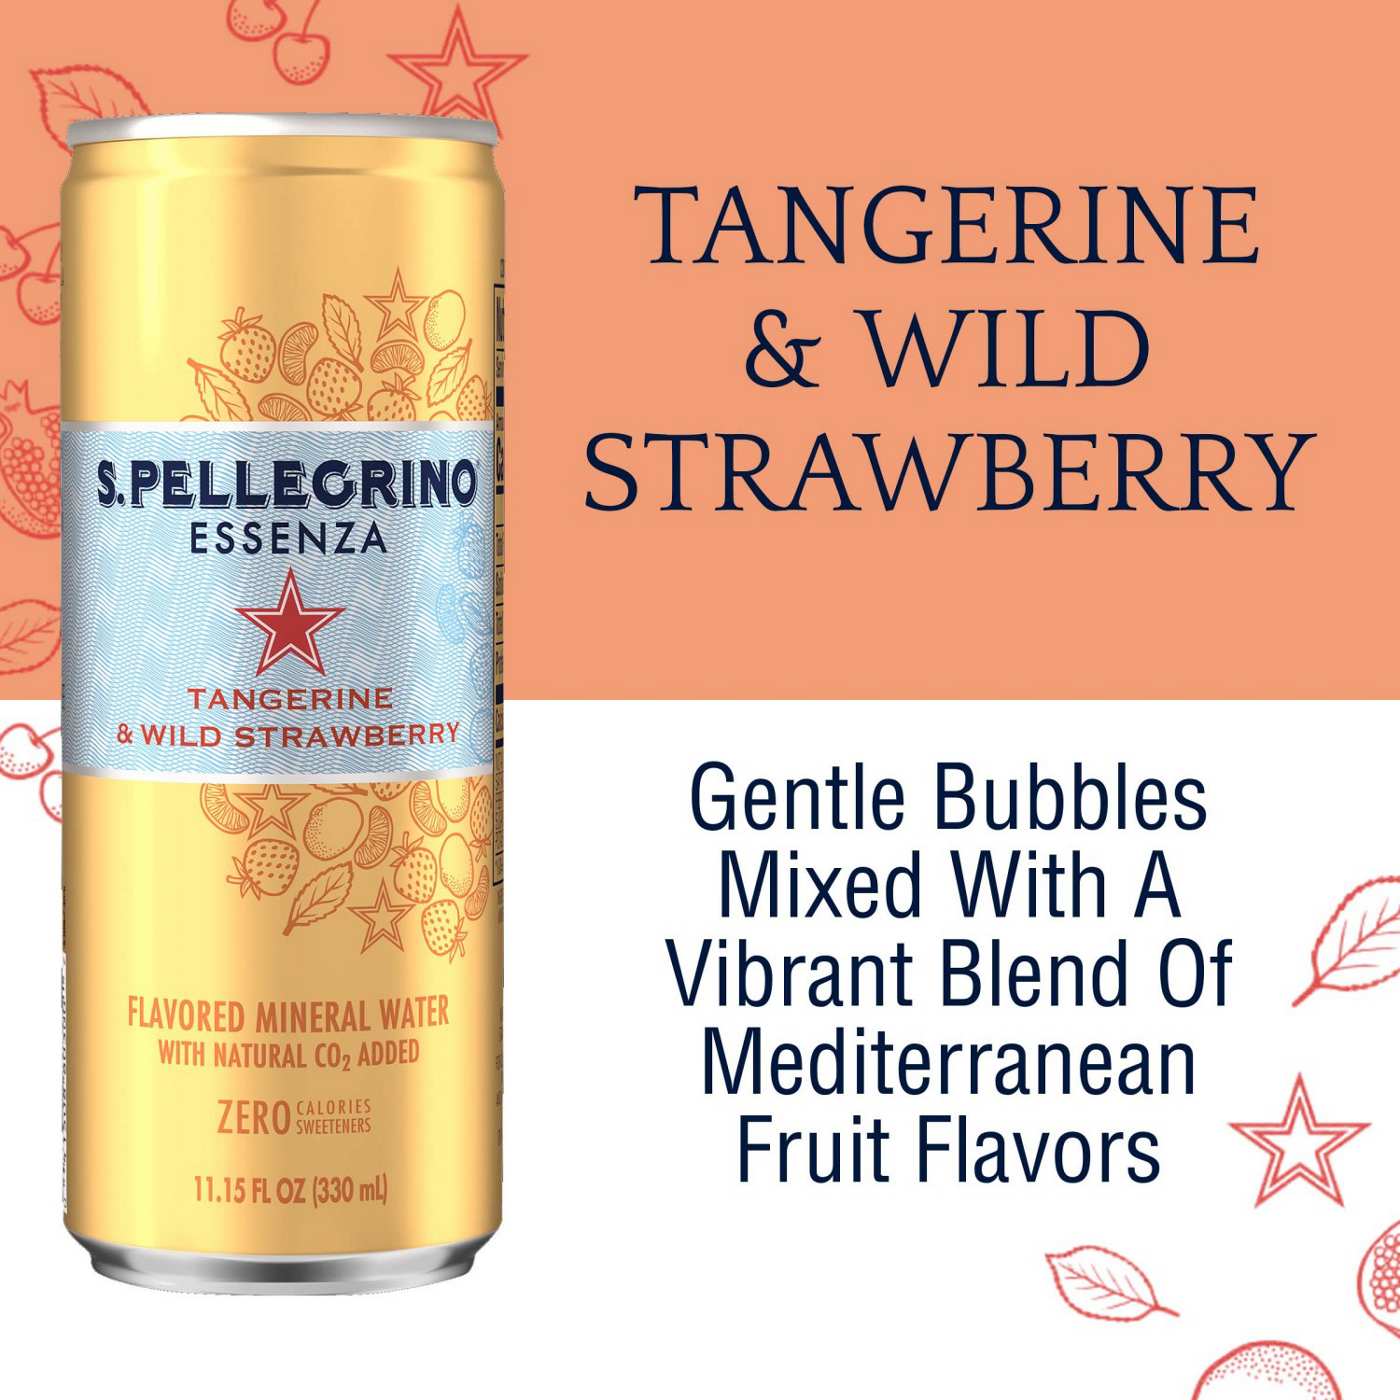 San Pellegrino Essenza Tangerine & Strawberry Flavored Mineral Water 11.2 oz Cans; image 4 of 6